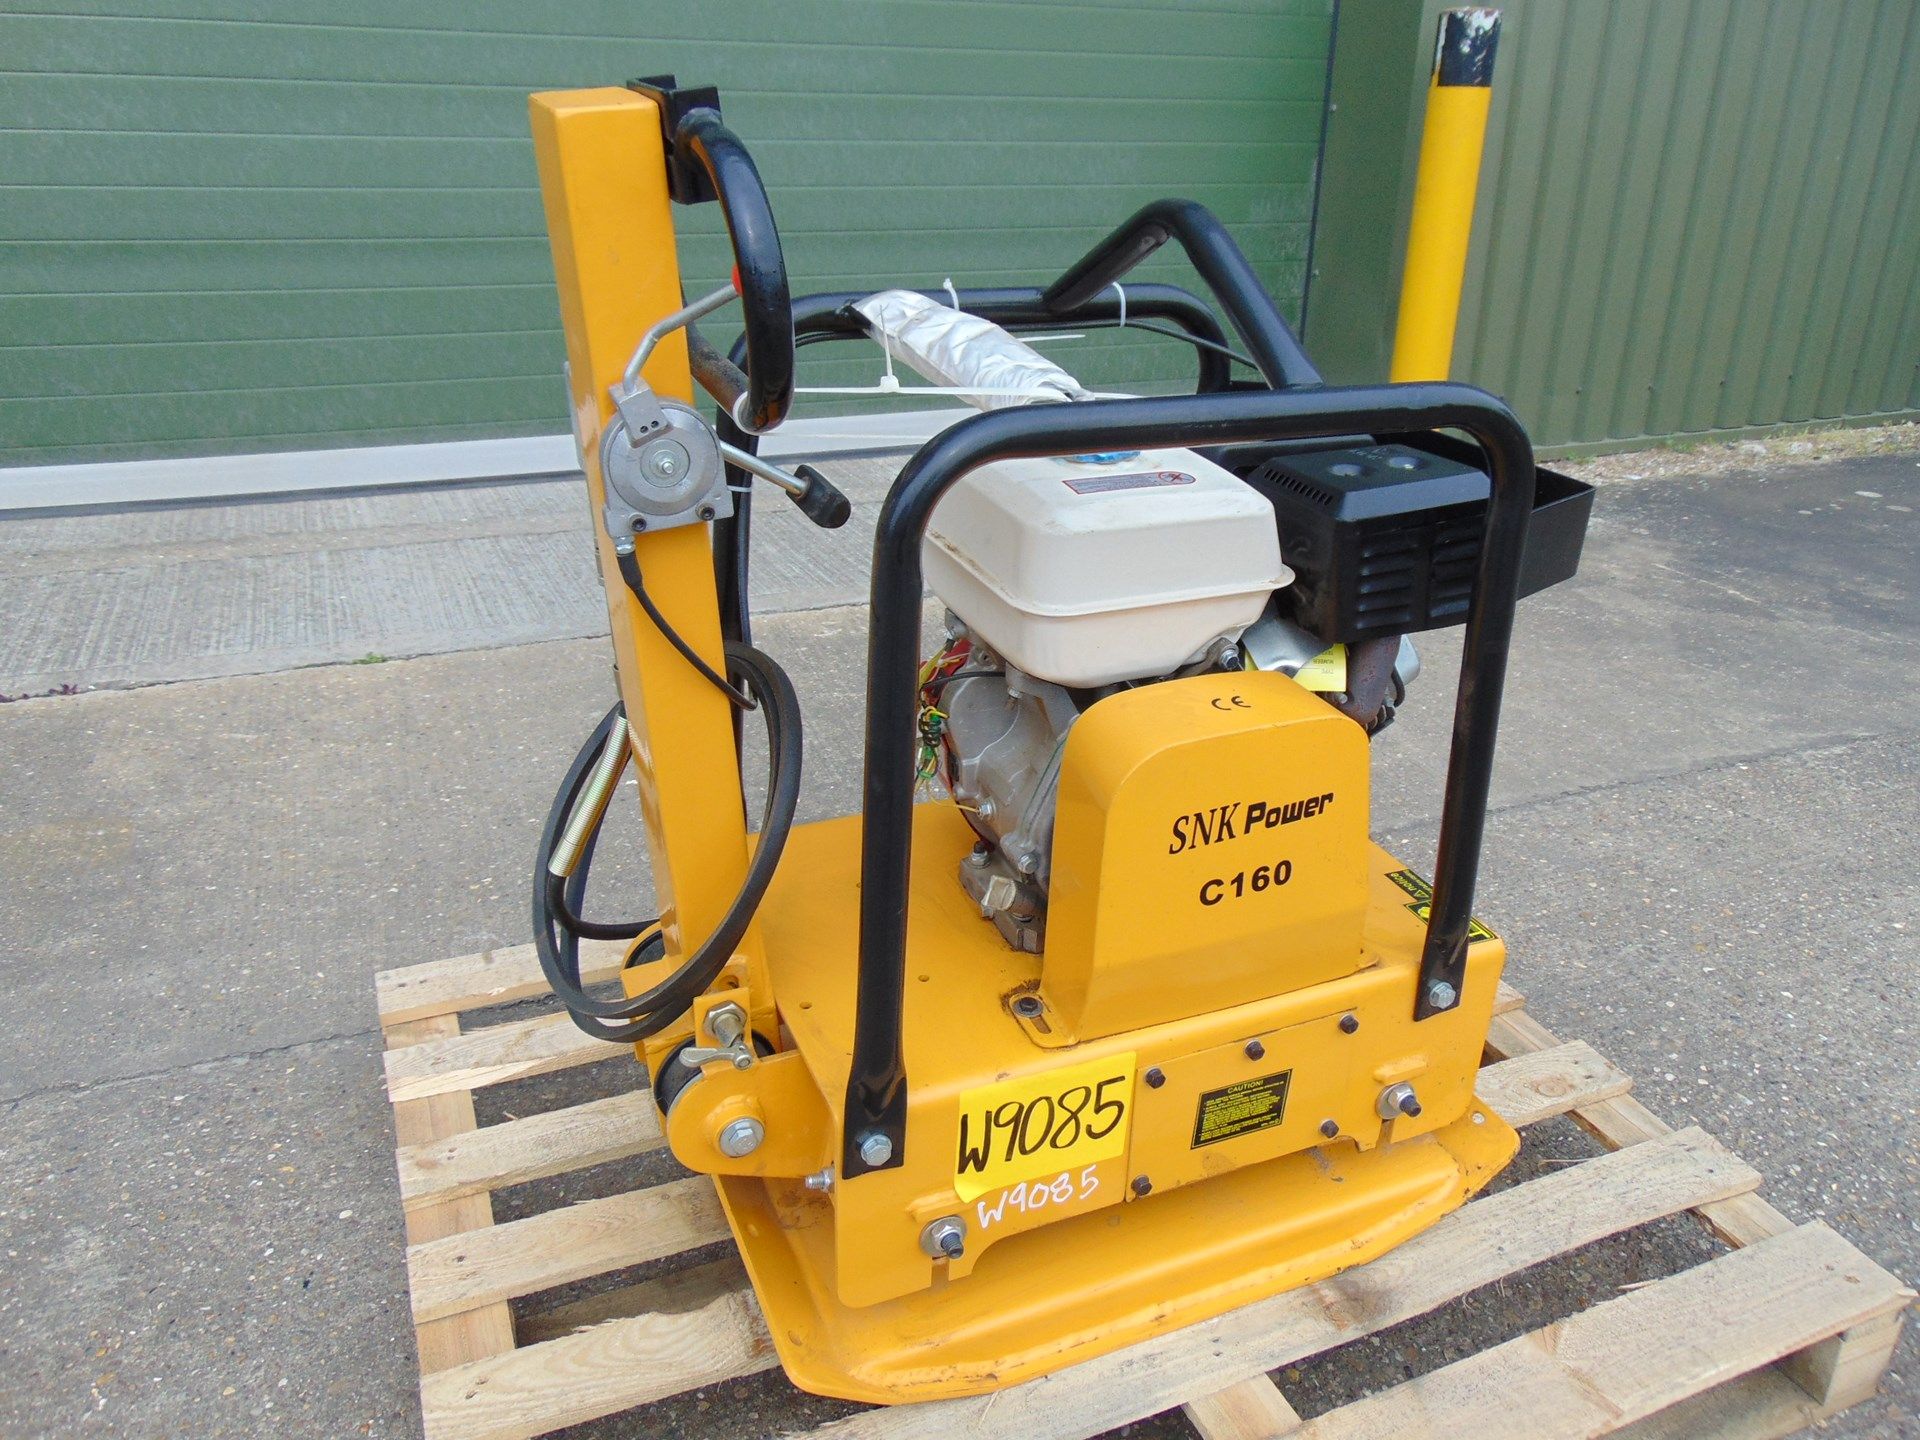 New & Unused SNK Power C160 Petrol Powered Compaction Wacker Plate - Image 2 of 11